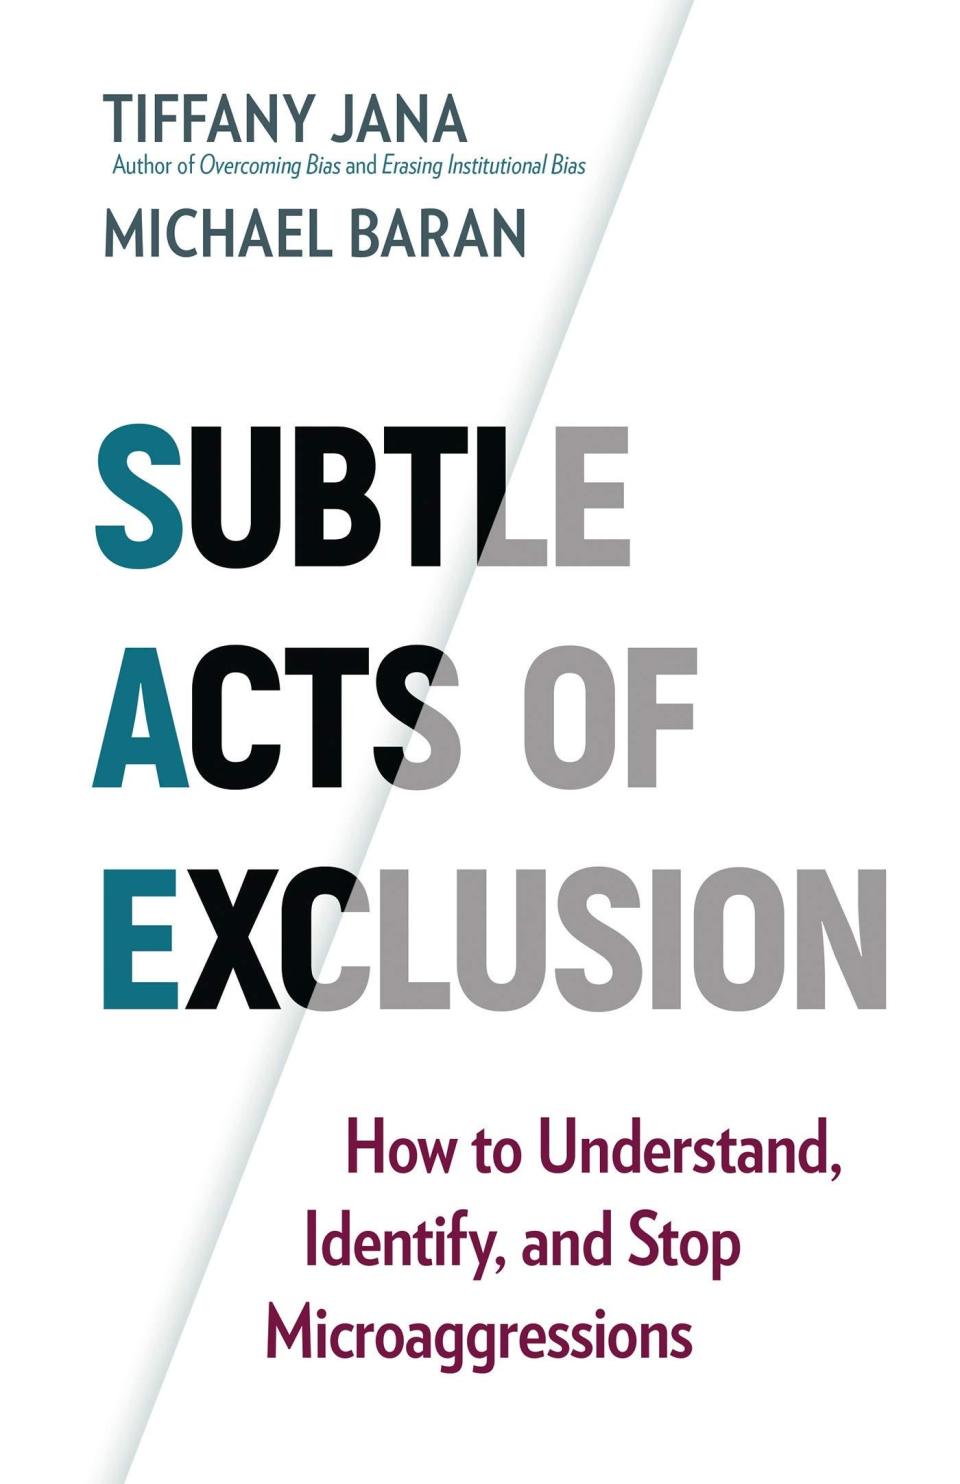 ‘Subtle Acts of Exclusion’ by Tiffany Jana and Michael Baran